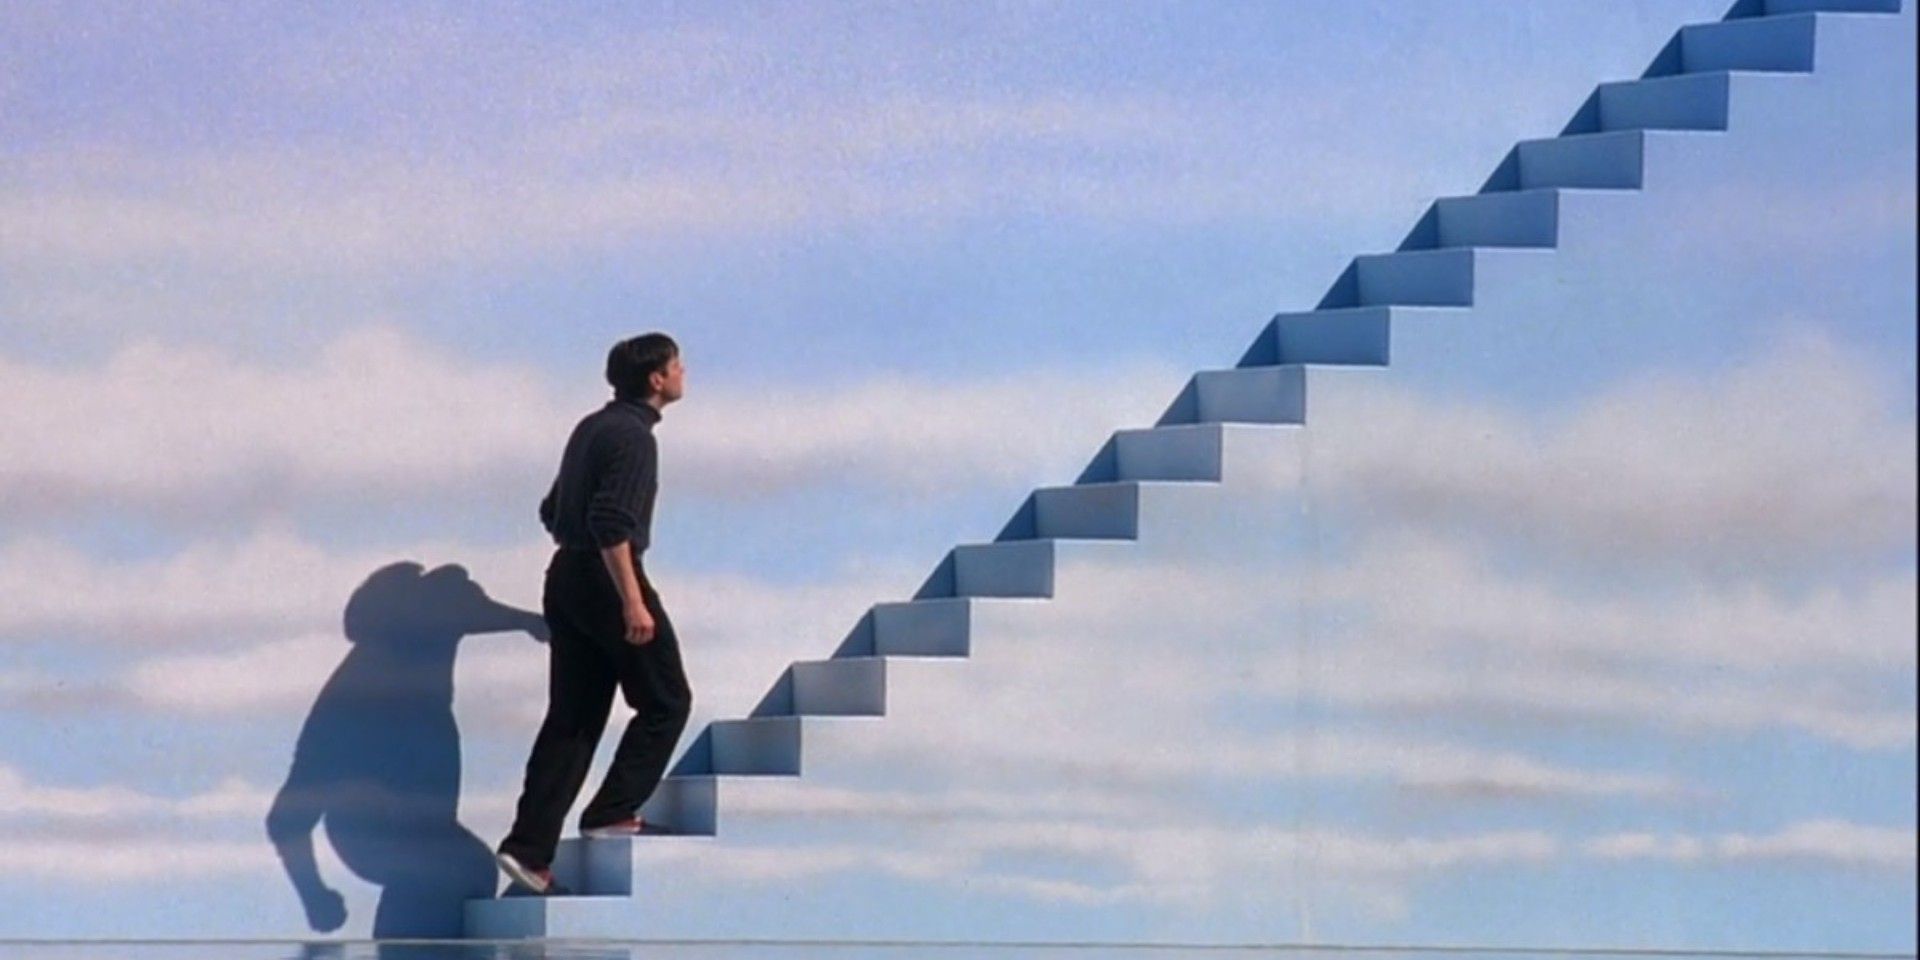 Jim Carrey as Truman ascending steps into the sky in The Truman Show